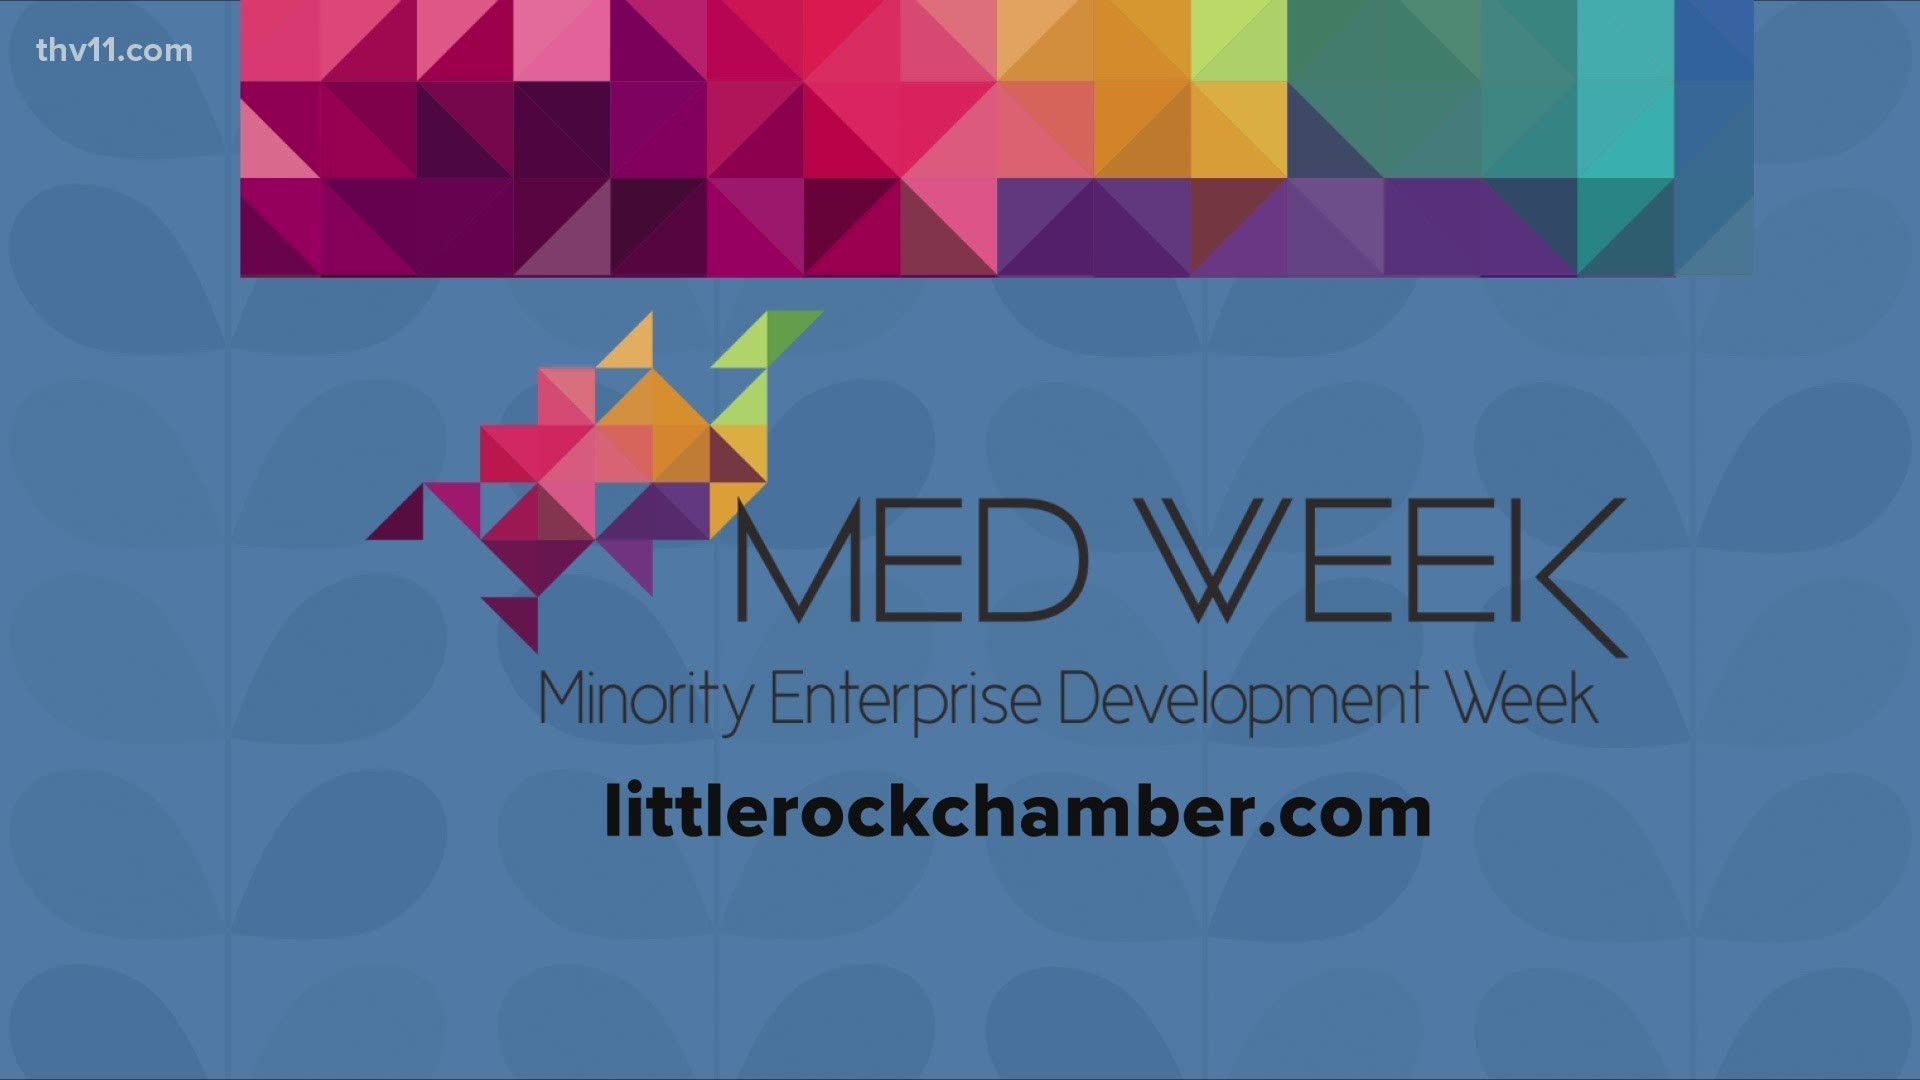 Minority Enterprise Development (MED) Week celebrates and supports minority businesses with virtual training, webinars and events from Sept. 14 to Sept. 20.